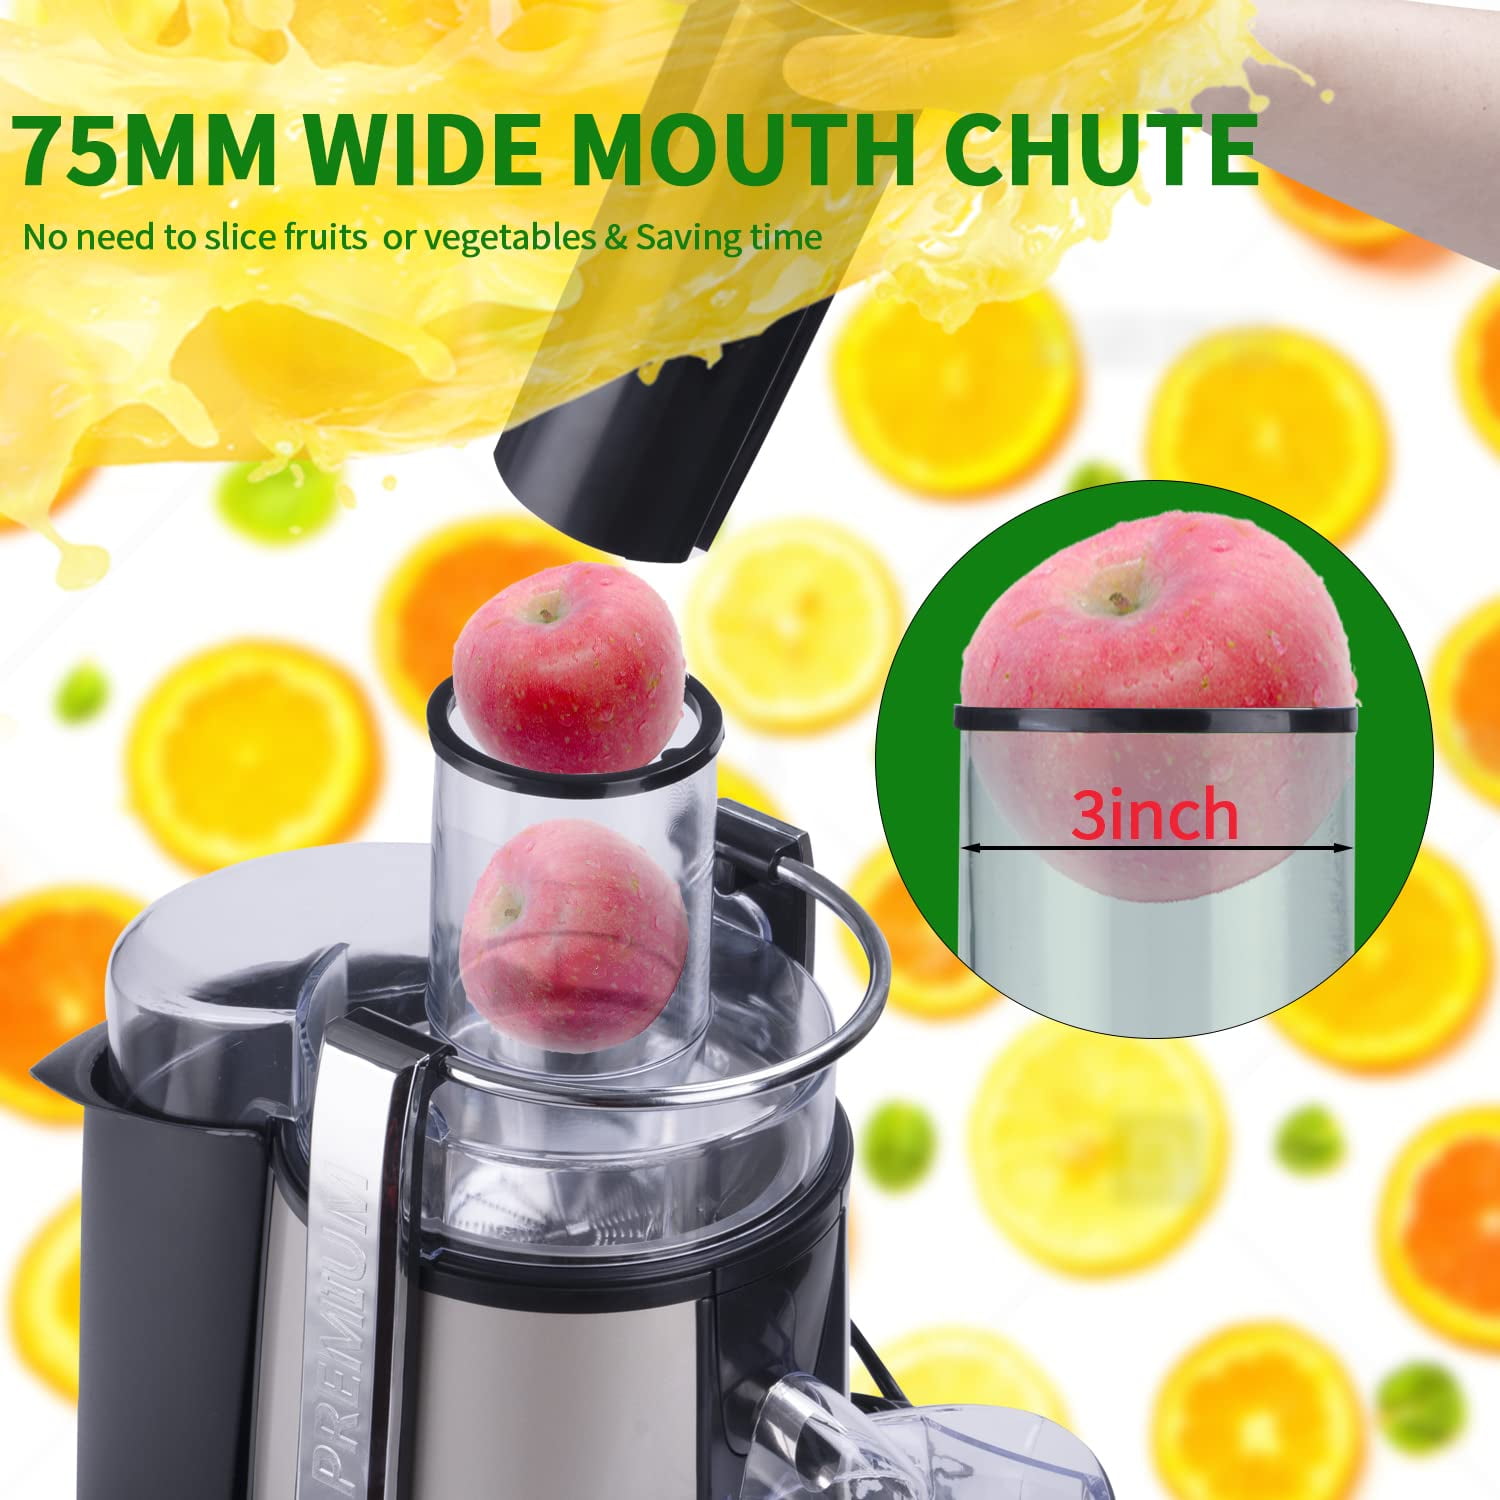 undefinedCentrifugal Juicer Machine with LCD Monitor - On Sale